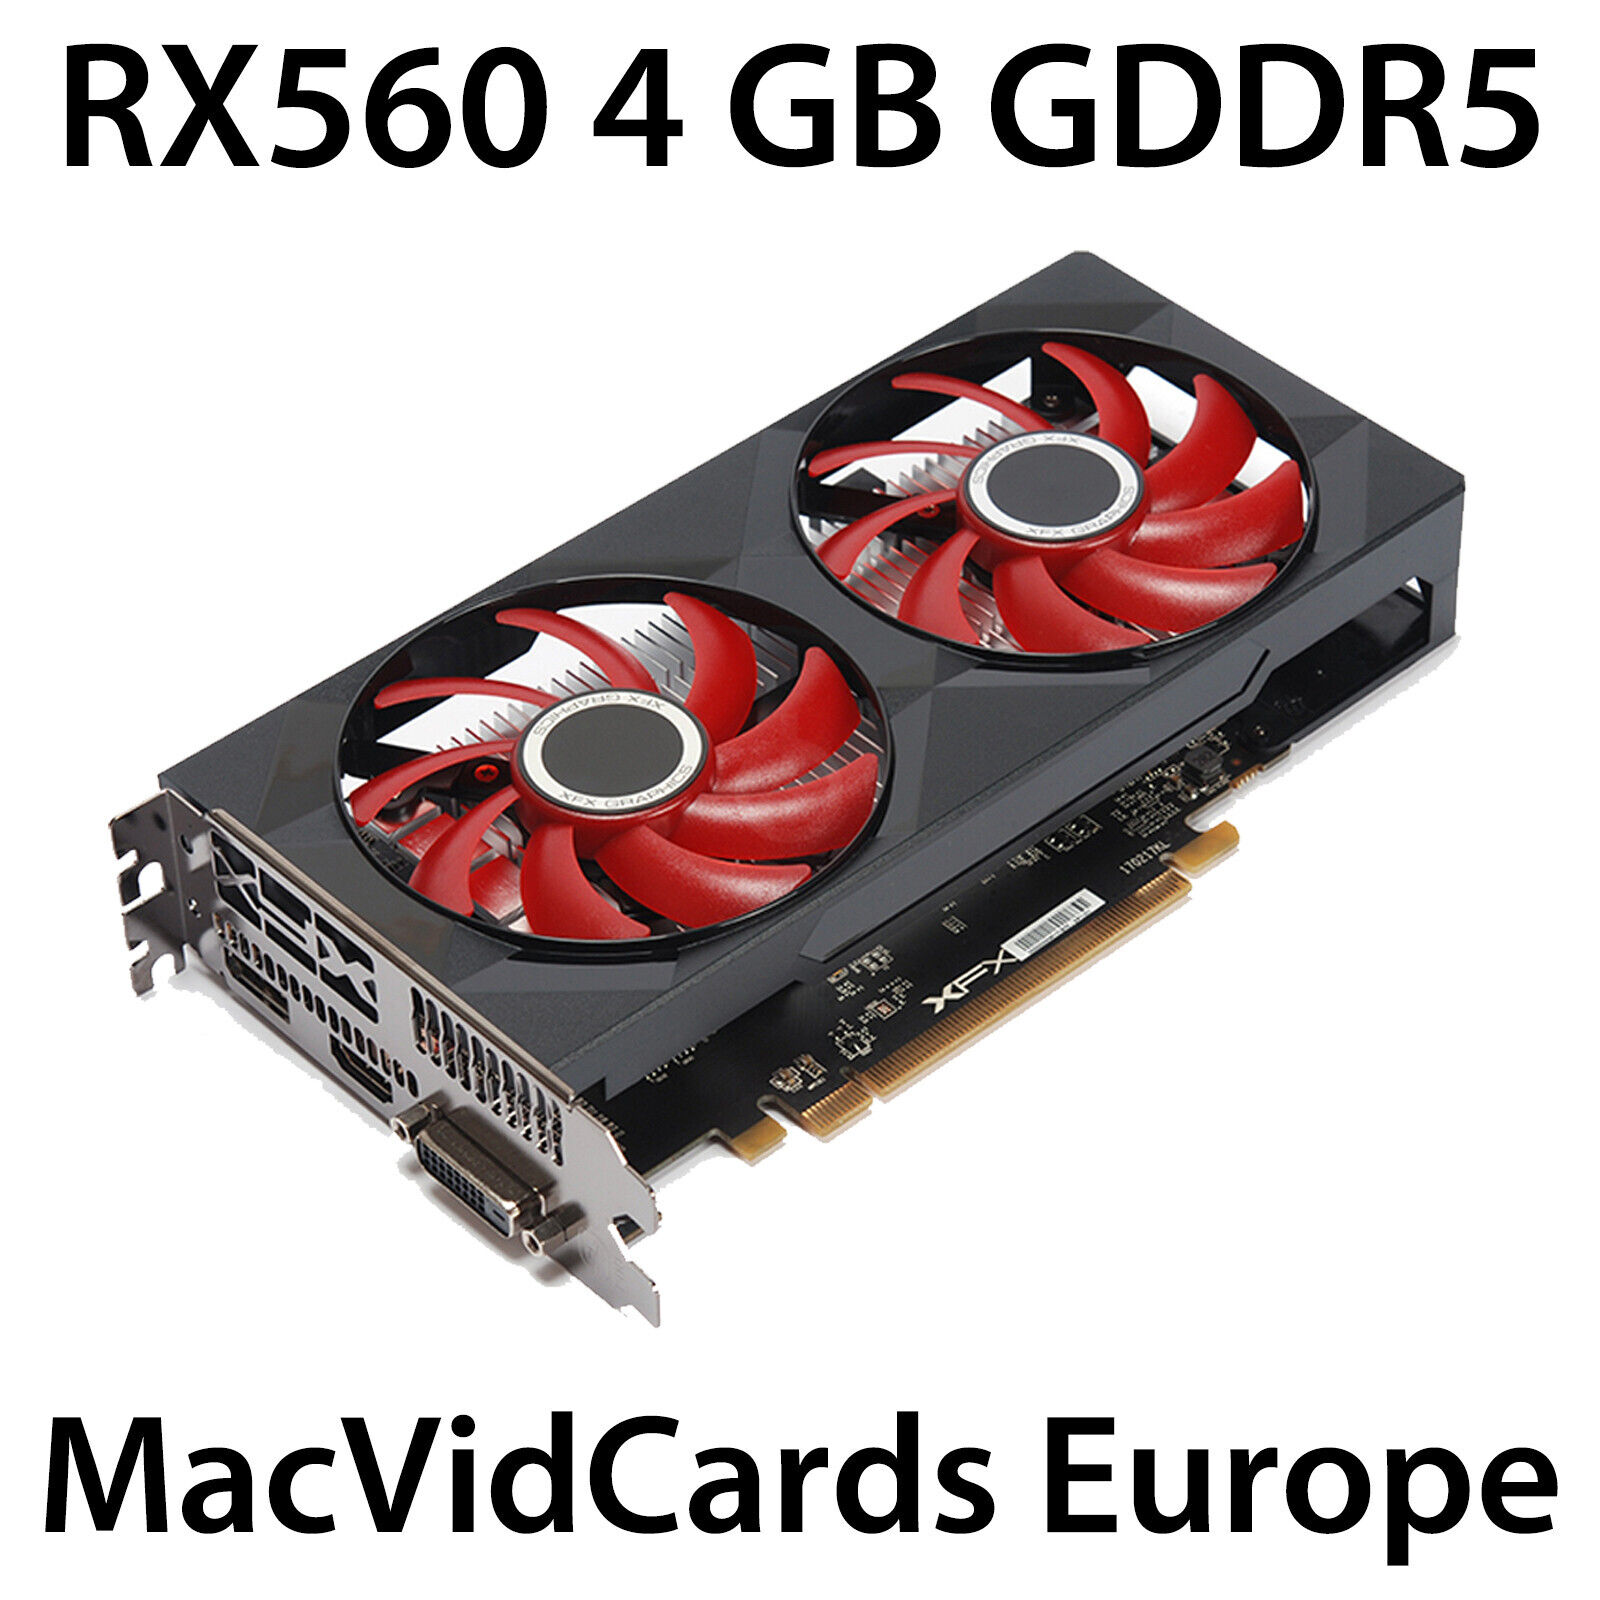 MacVidCards AMD Radeon RX 560 4 GB GDDR5 for Apple Mac Pro with BOOT SCREEN